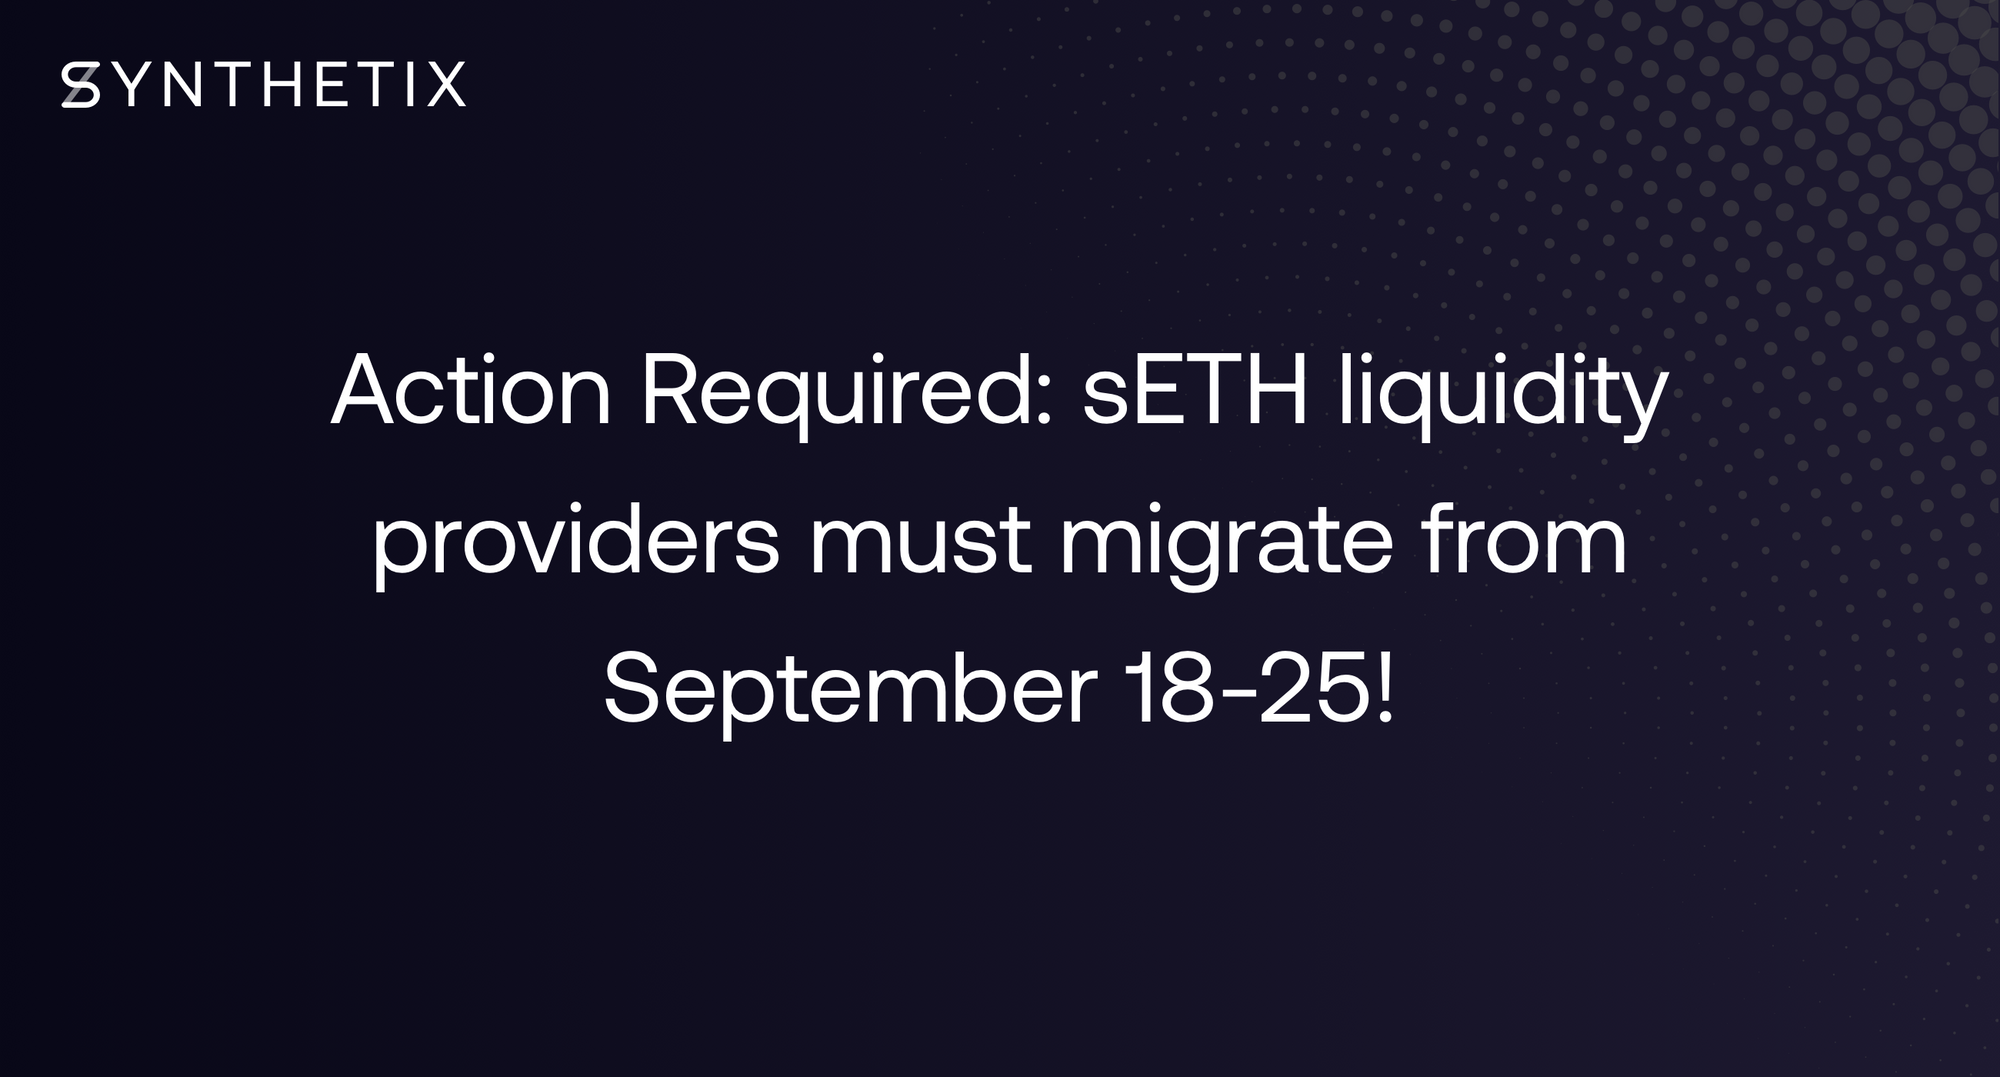 Action Required: sETH liquidity providers must migrate from September 18-25!